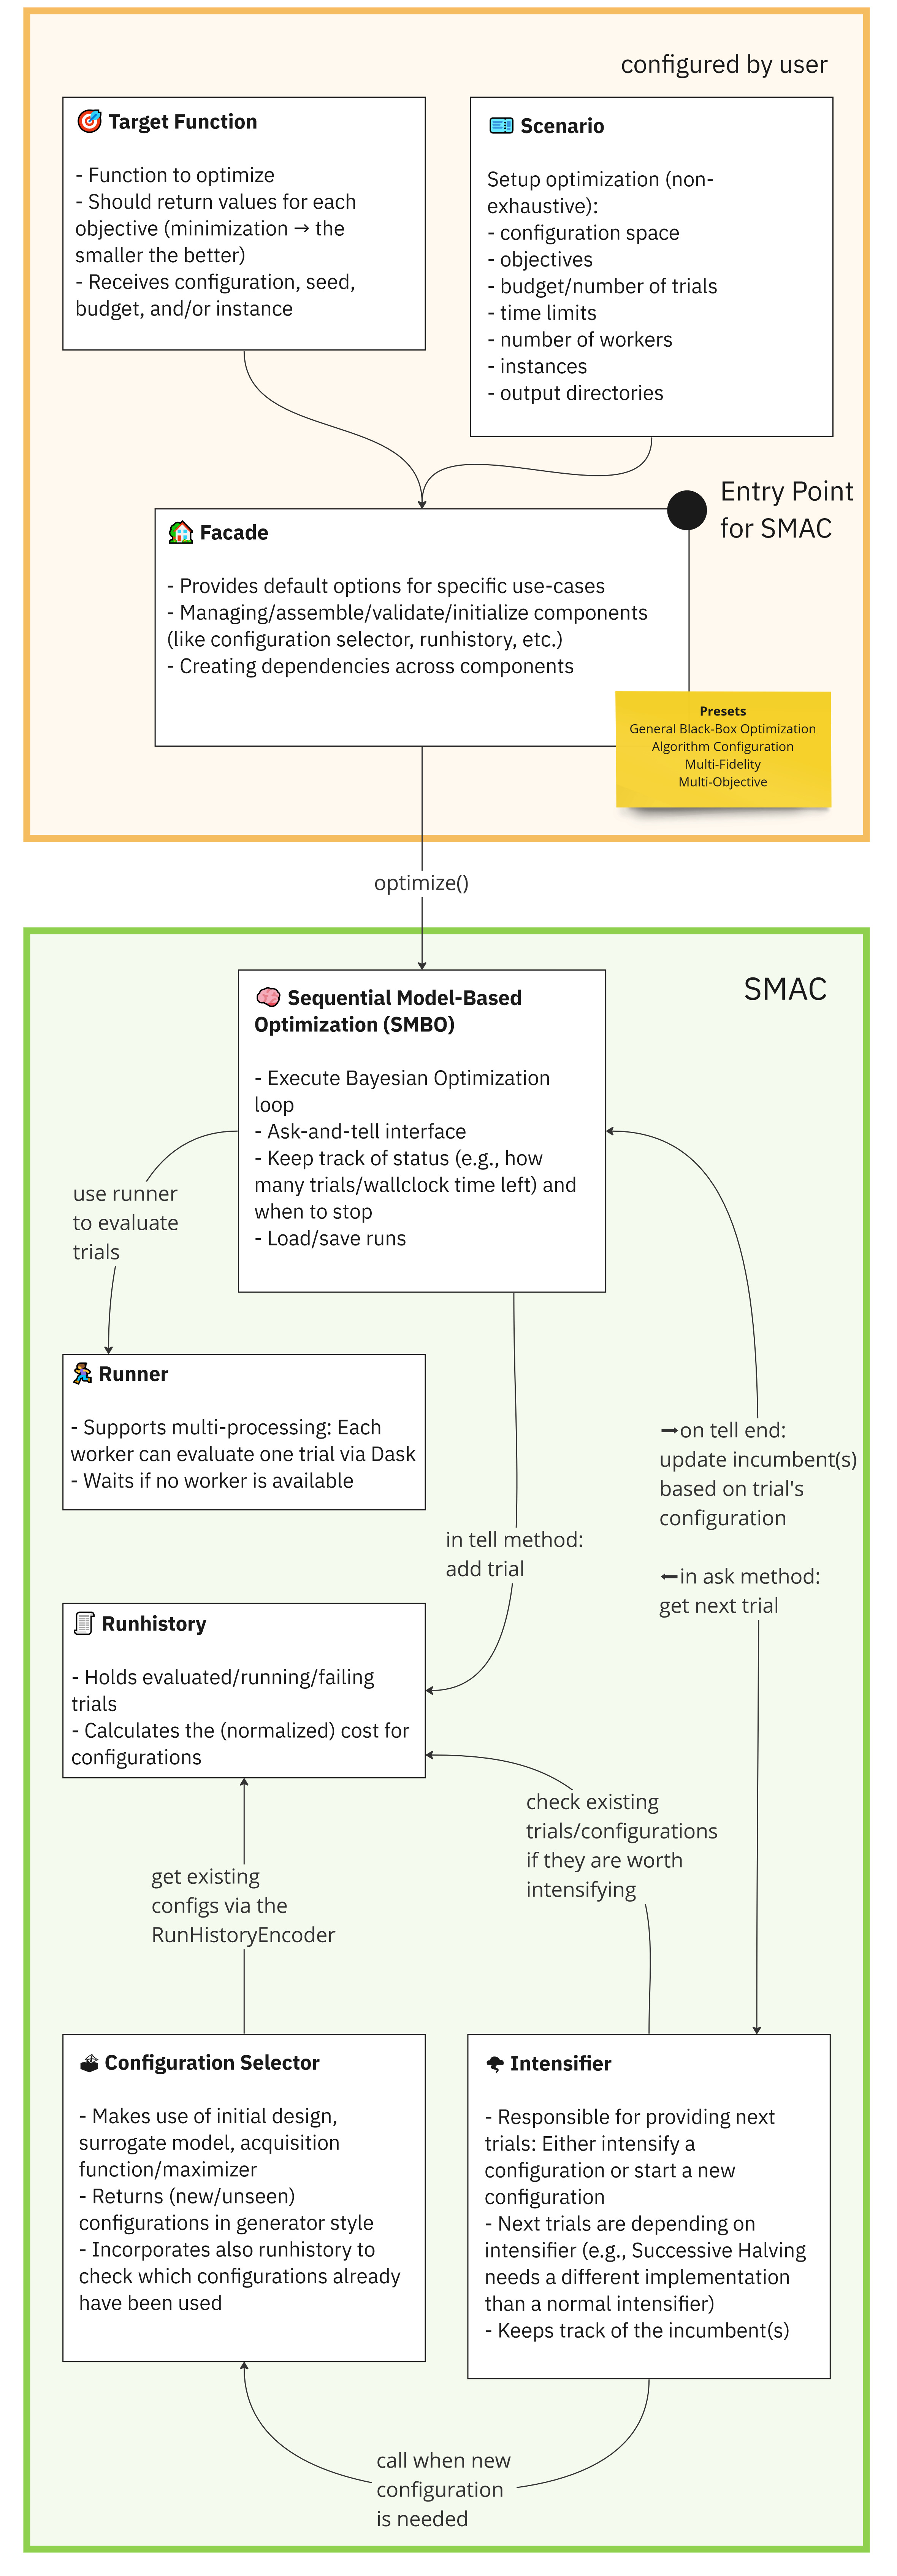 Interaction of SMAC's components